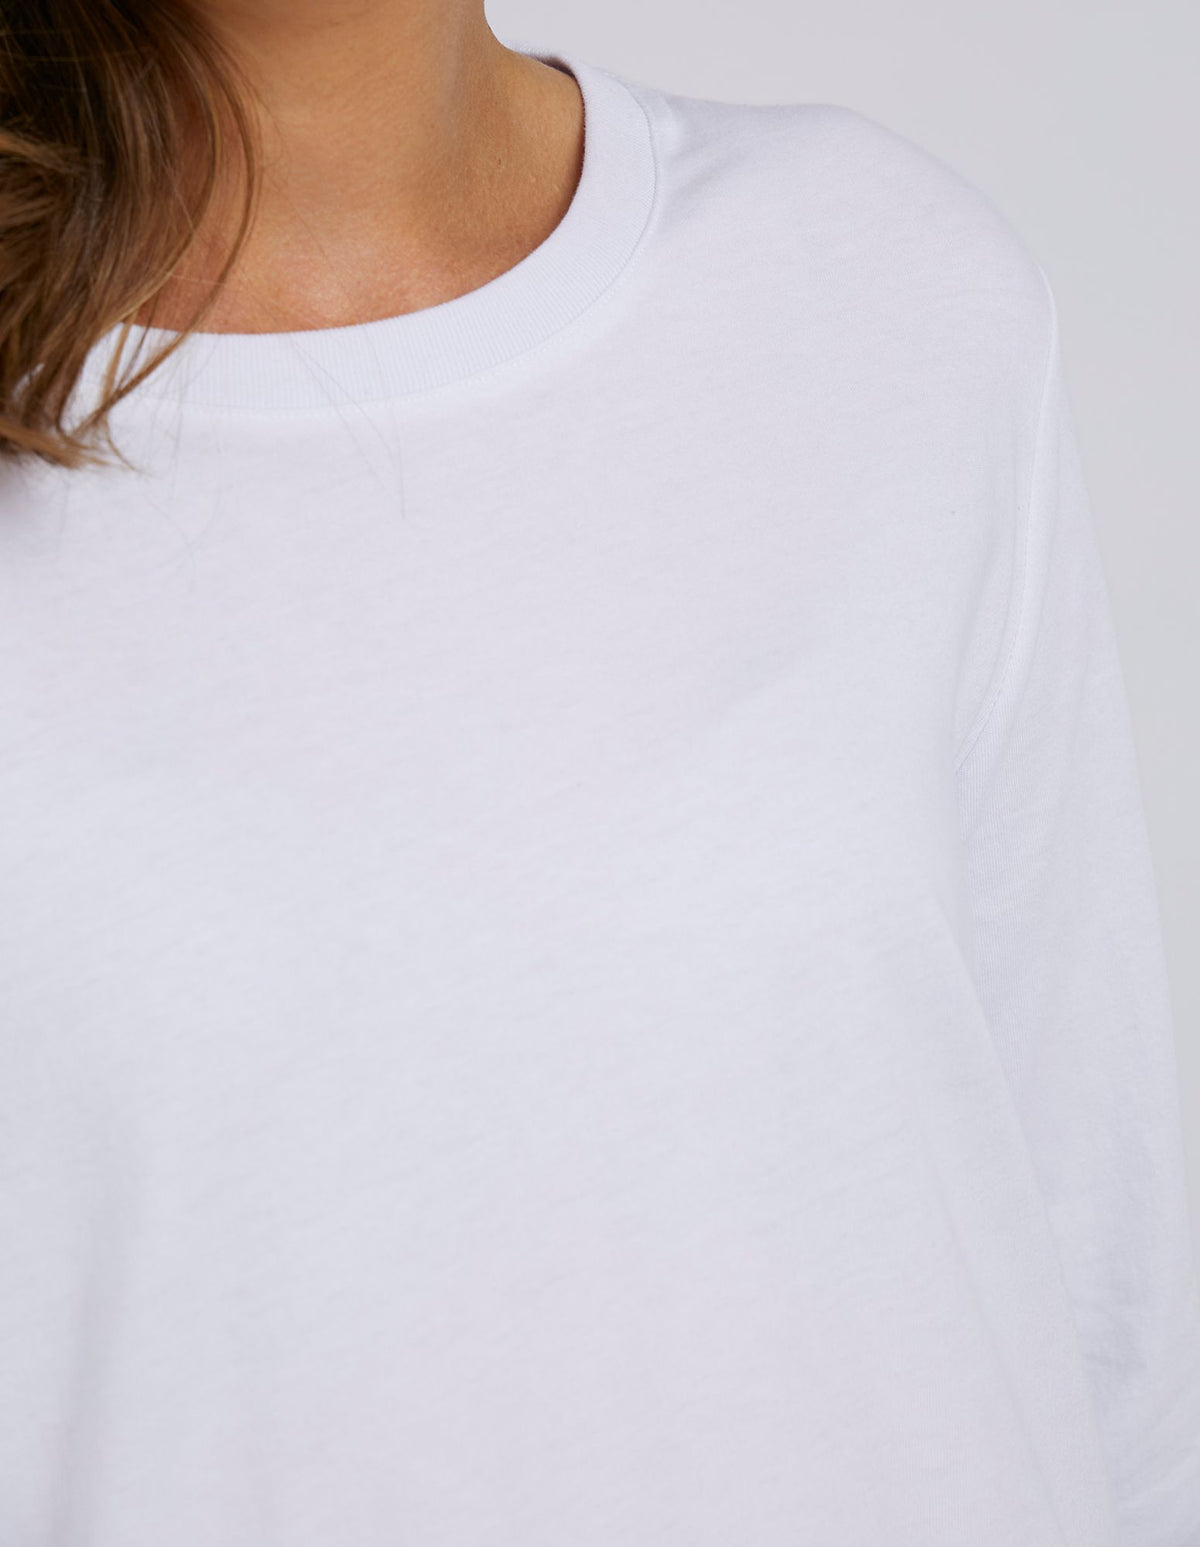 Manly Long Sleeve Tee - White - Foxwood - FUDGE Gifts Home Lifestyle